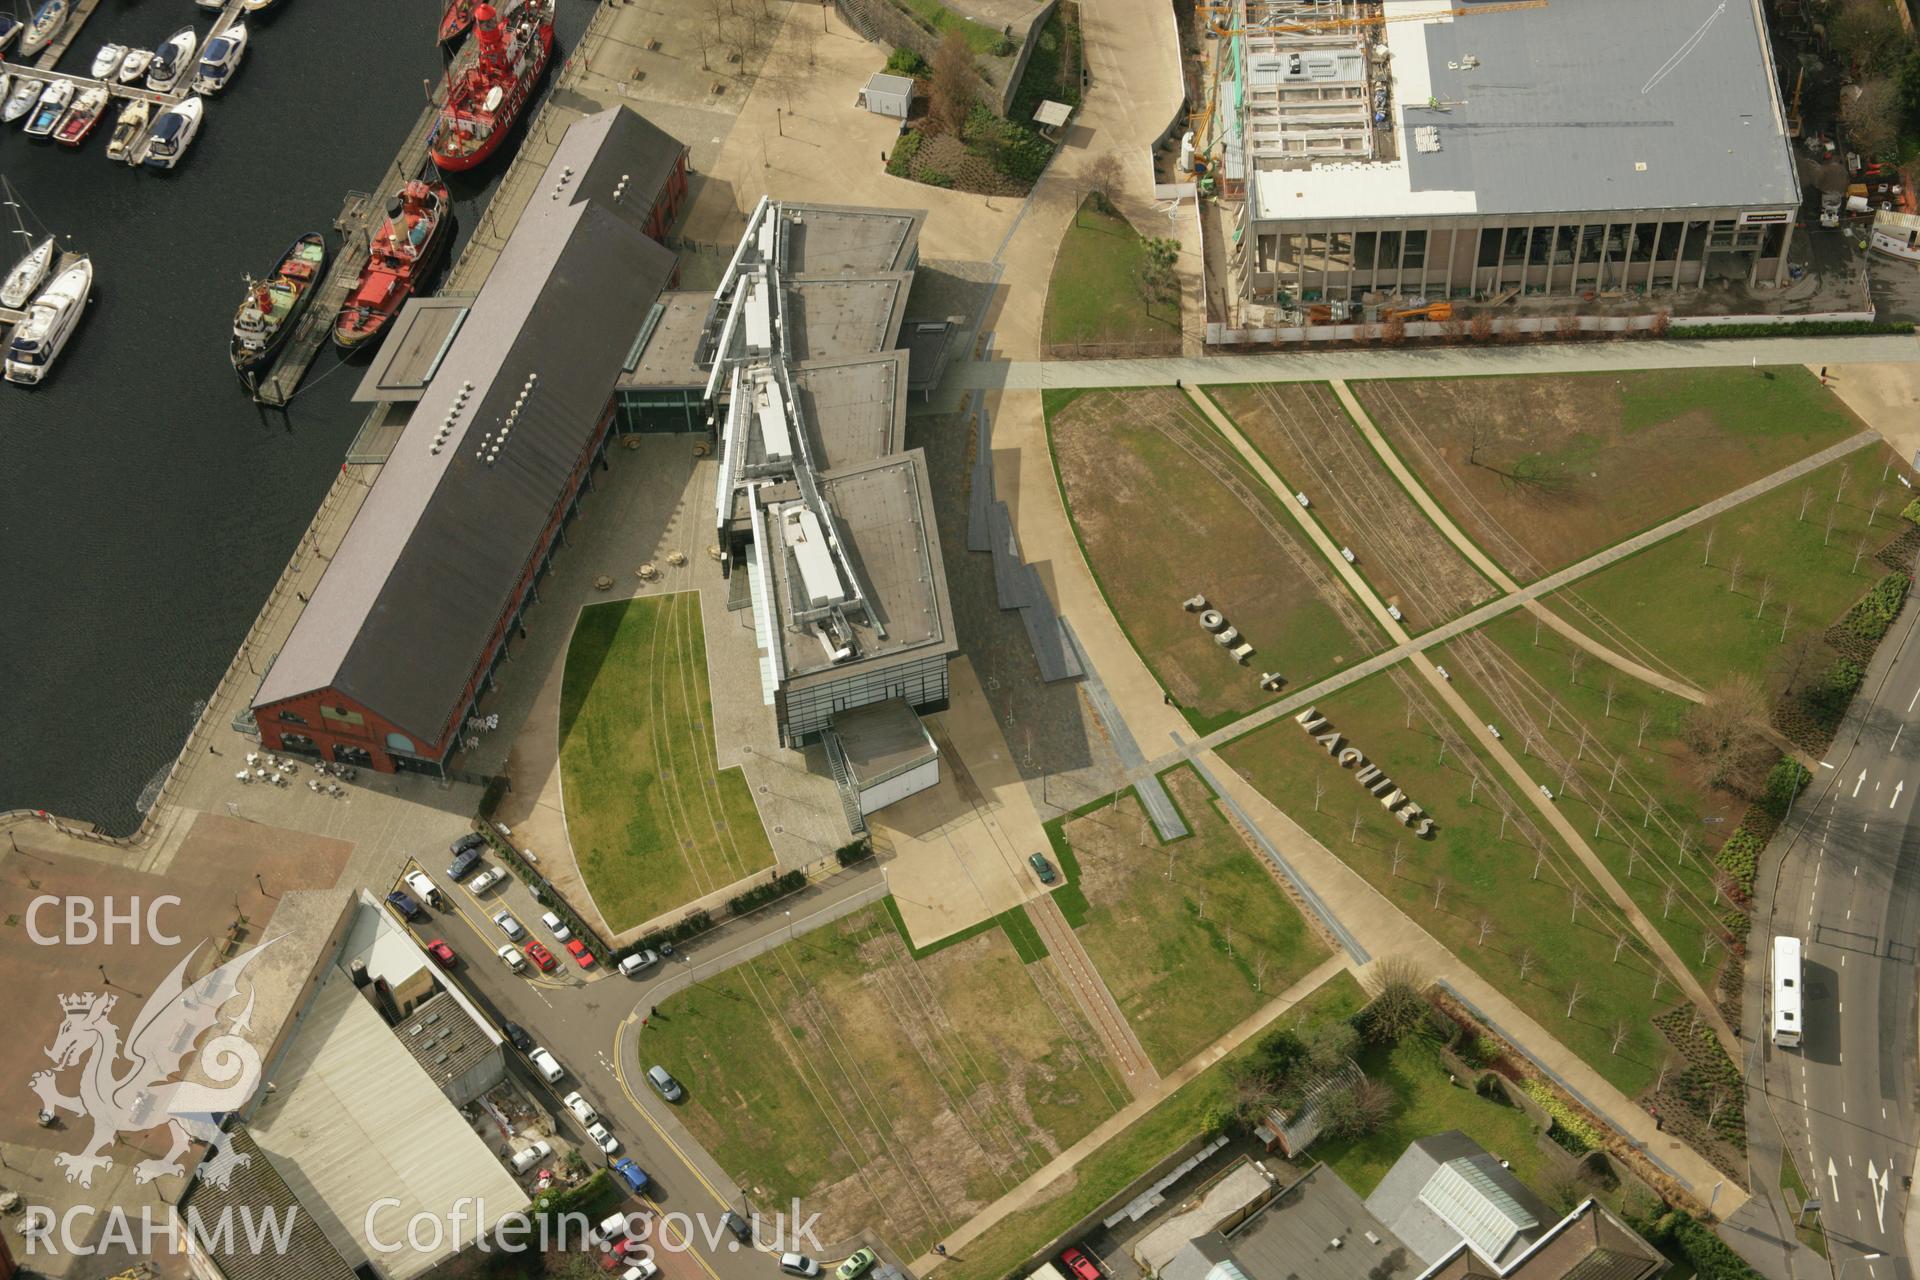 RCAHMW colour oblique aerial photograph of National Waterfront Museum, Swansea. Taken on 16 March 2007 by Toby Driver